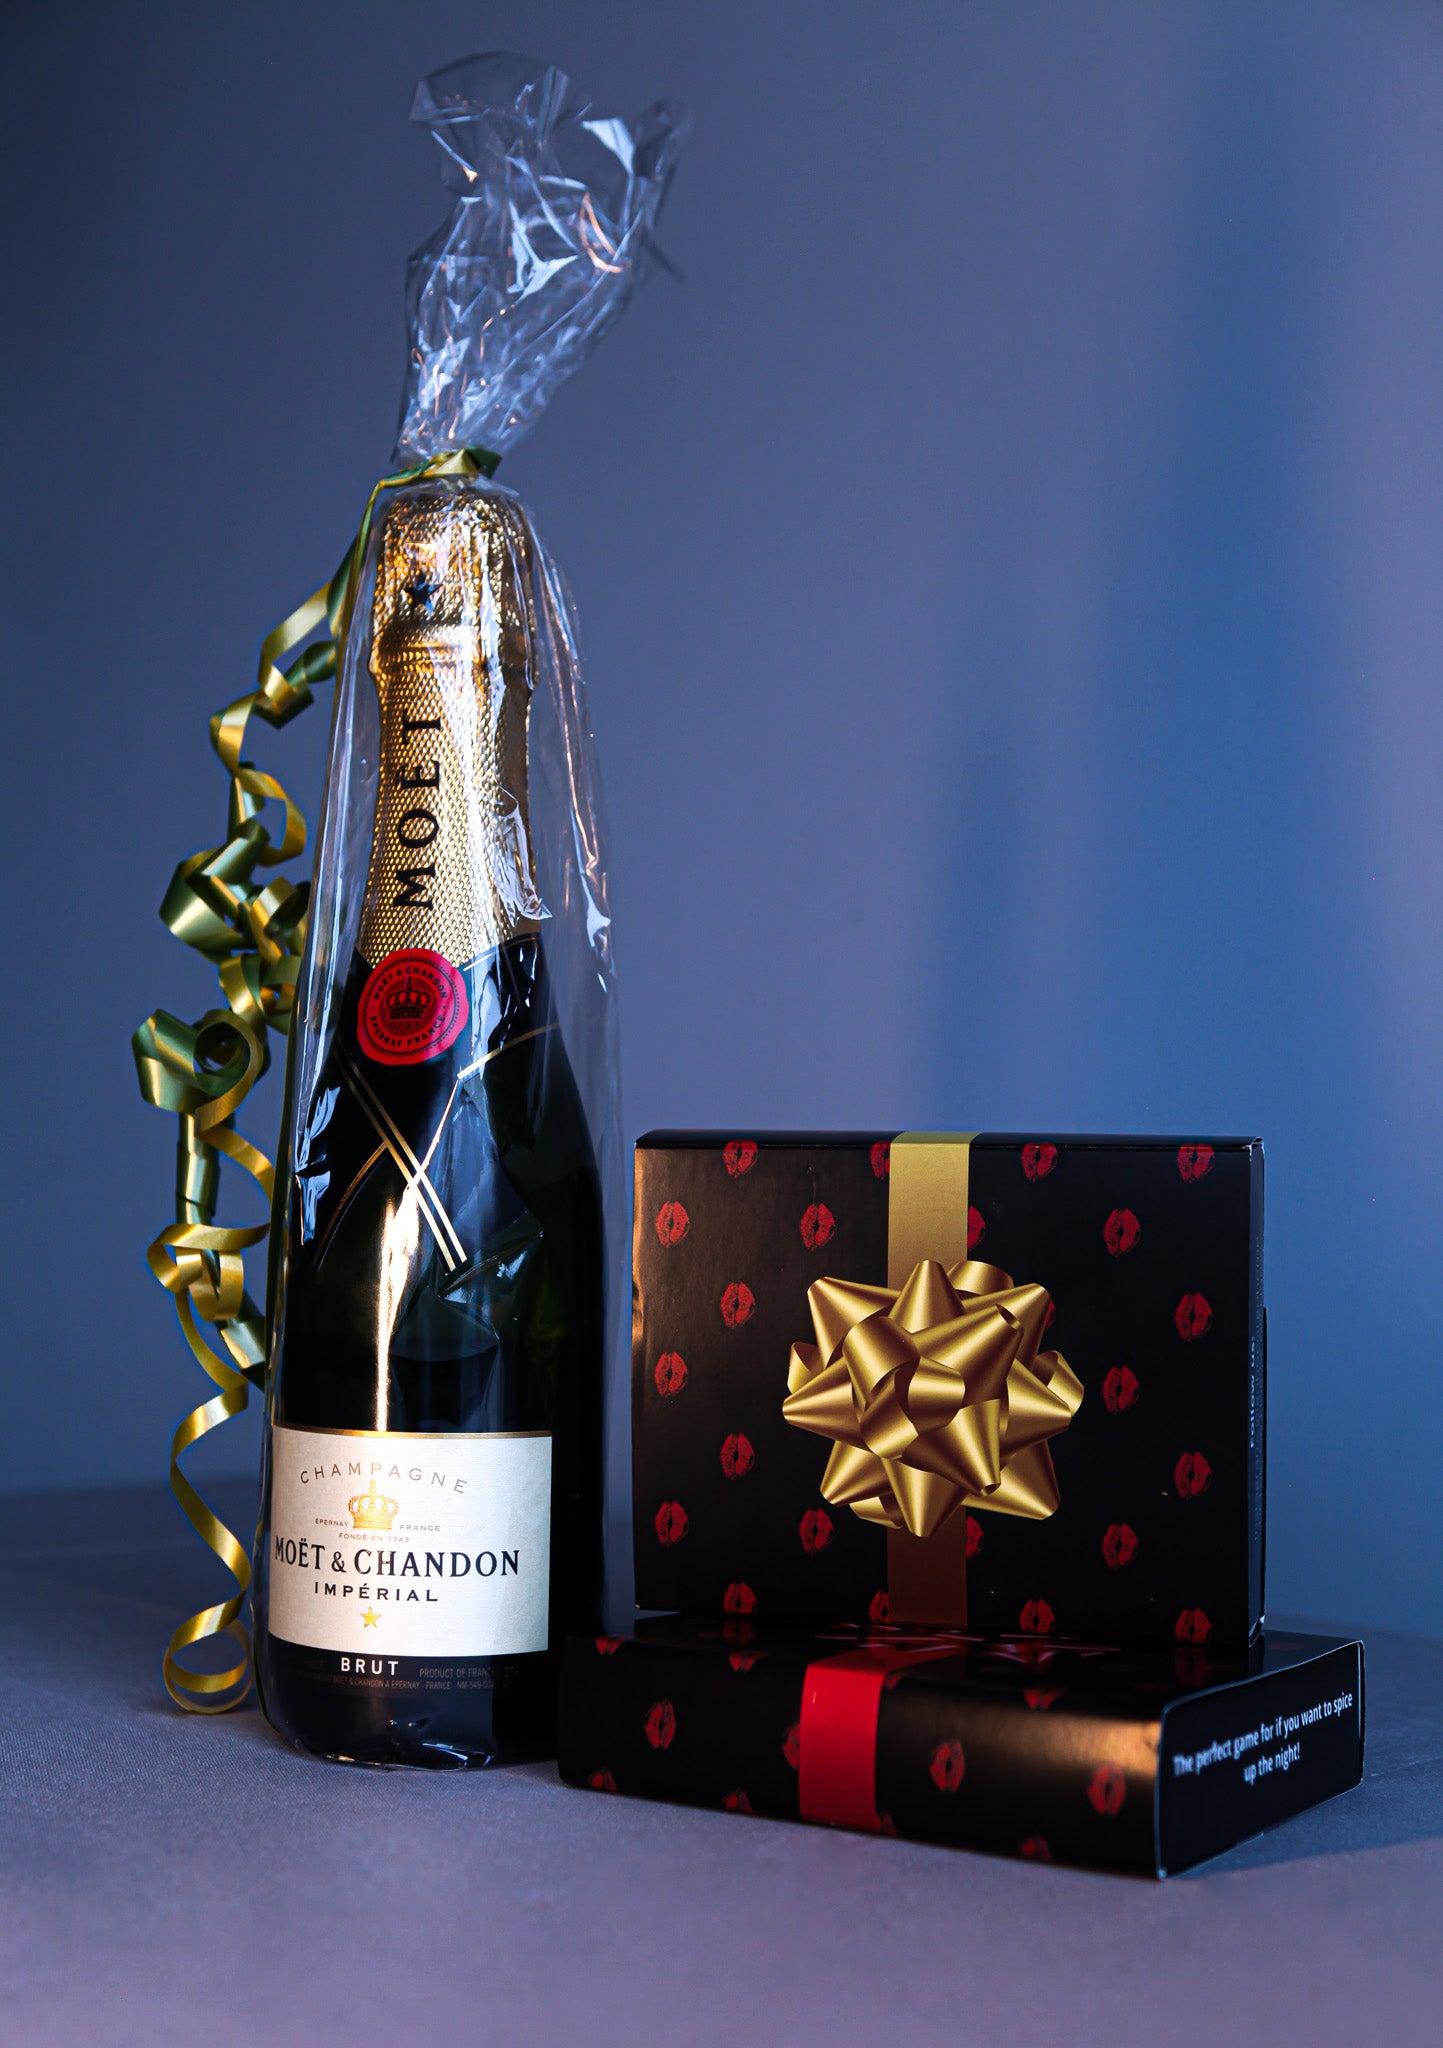 Moet & chandon bottle gift with a drinking game in luxurious gift packaging